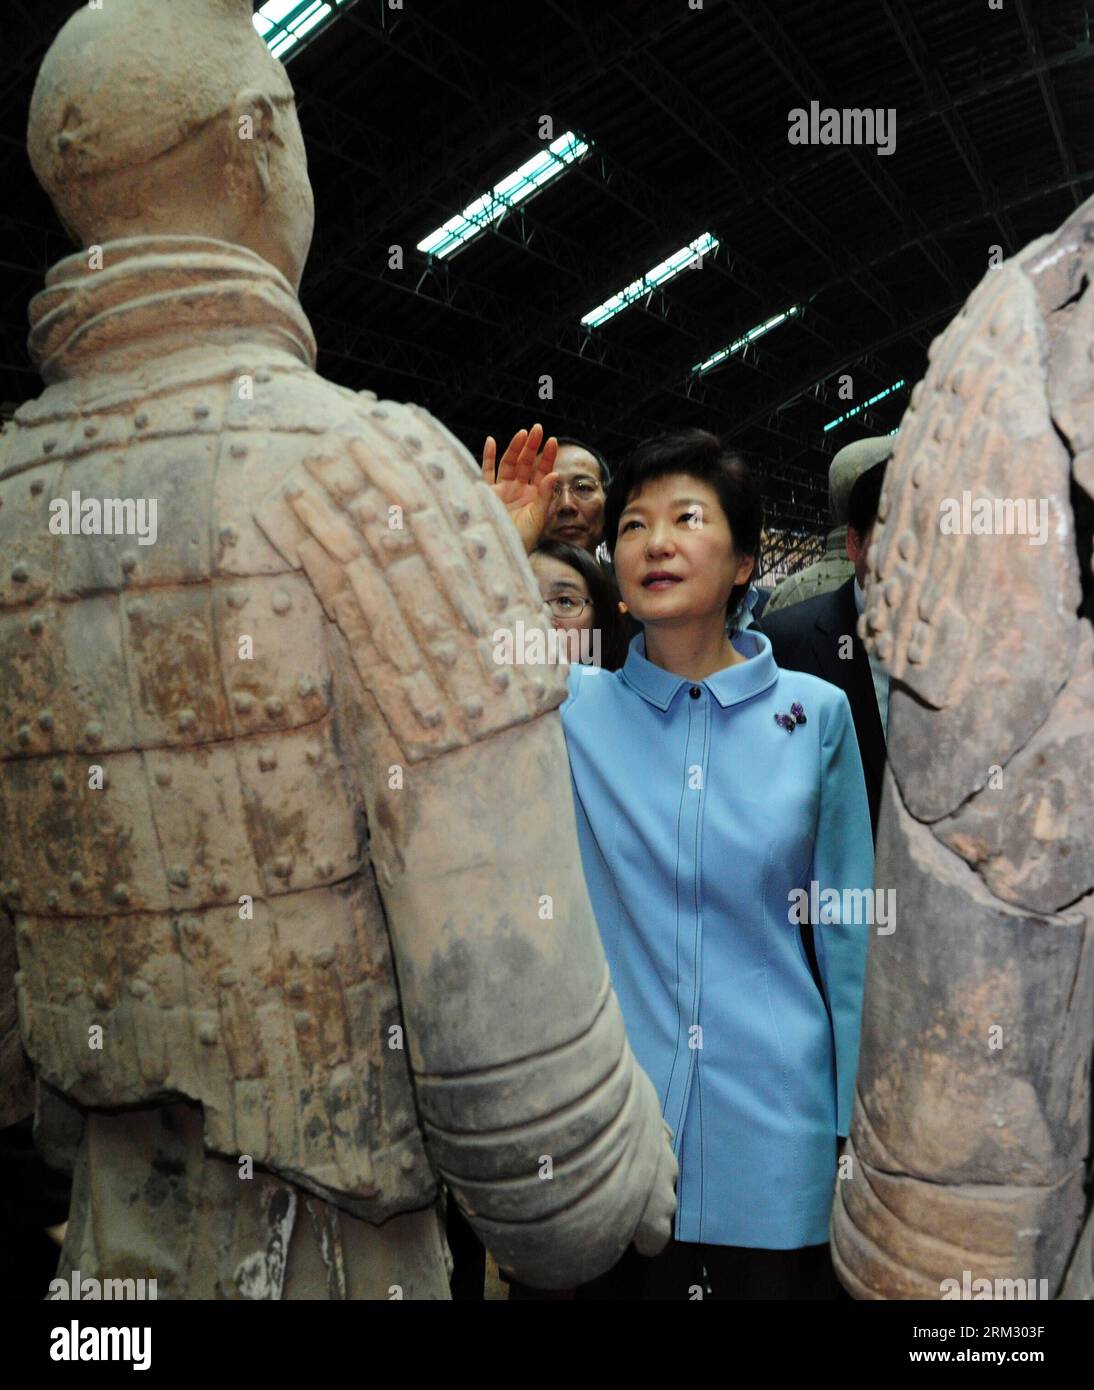 Bildnummer: 59920644  Datum: 30.06.2013  Copyright: imago/Xinhua (130630) -- XI AN, June 30, 2013 (Xinhua) -- Republic of Korea (ROK) President Park Geun-hye visits the ancient terracotta army, buried for centuries to guard the tomb of China s first emperor Qinshihuang of the Qin Dynasty (221 BC-207 BC), in Xi an, capital city of northwest China s Shaanxi Province, on June 30, 2013. (Xinhua/Ding Haitao) (ry) CHINA-XI AN-ROK PRESIDENT-ARRIVE (CN) PUBLICATIONxNOTxINxCHN Politik people Südkorea Terrakotta Armee Soldat xas x0x 2013 quadrat premiumd      59920644 Date 30 06 2013 Copyright Imago XIN Stock Photo